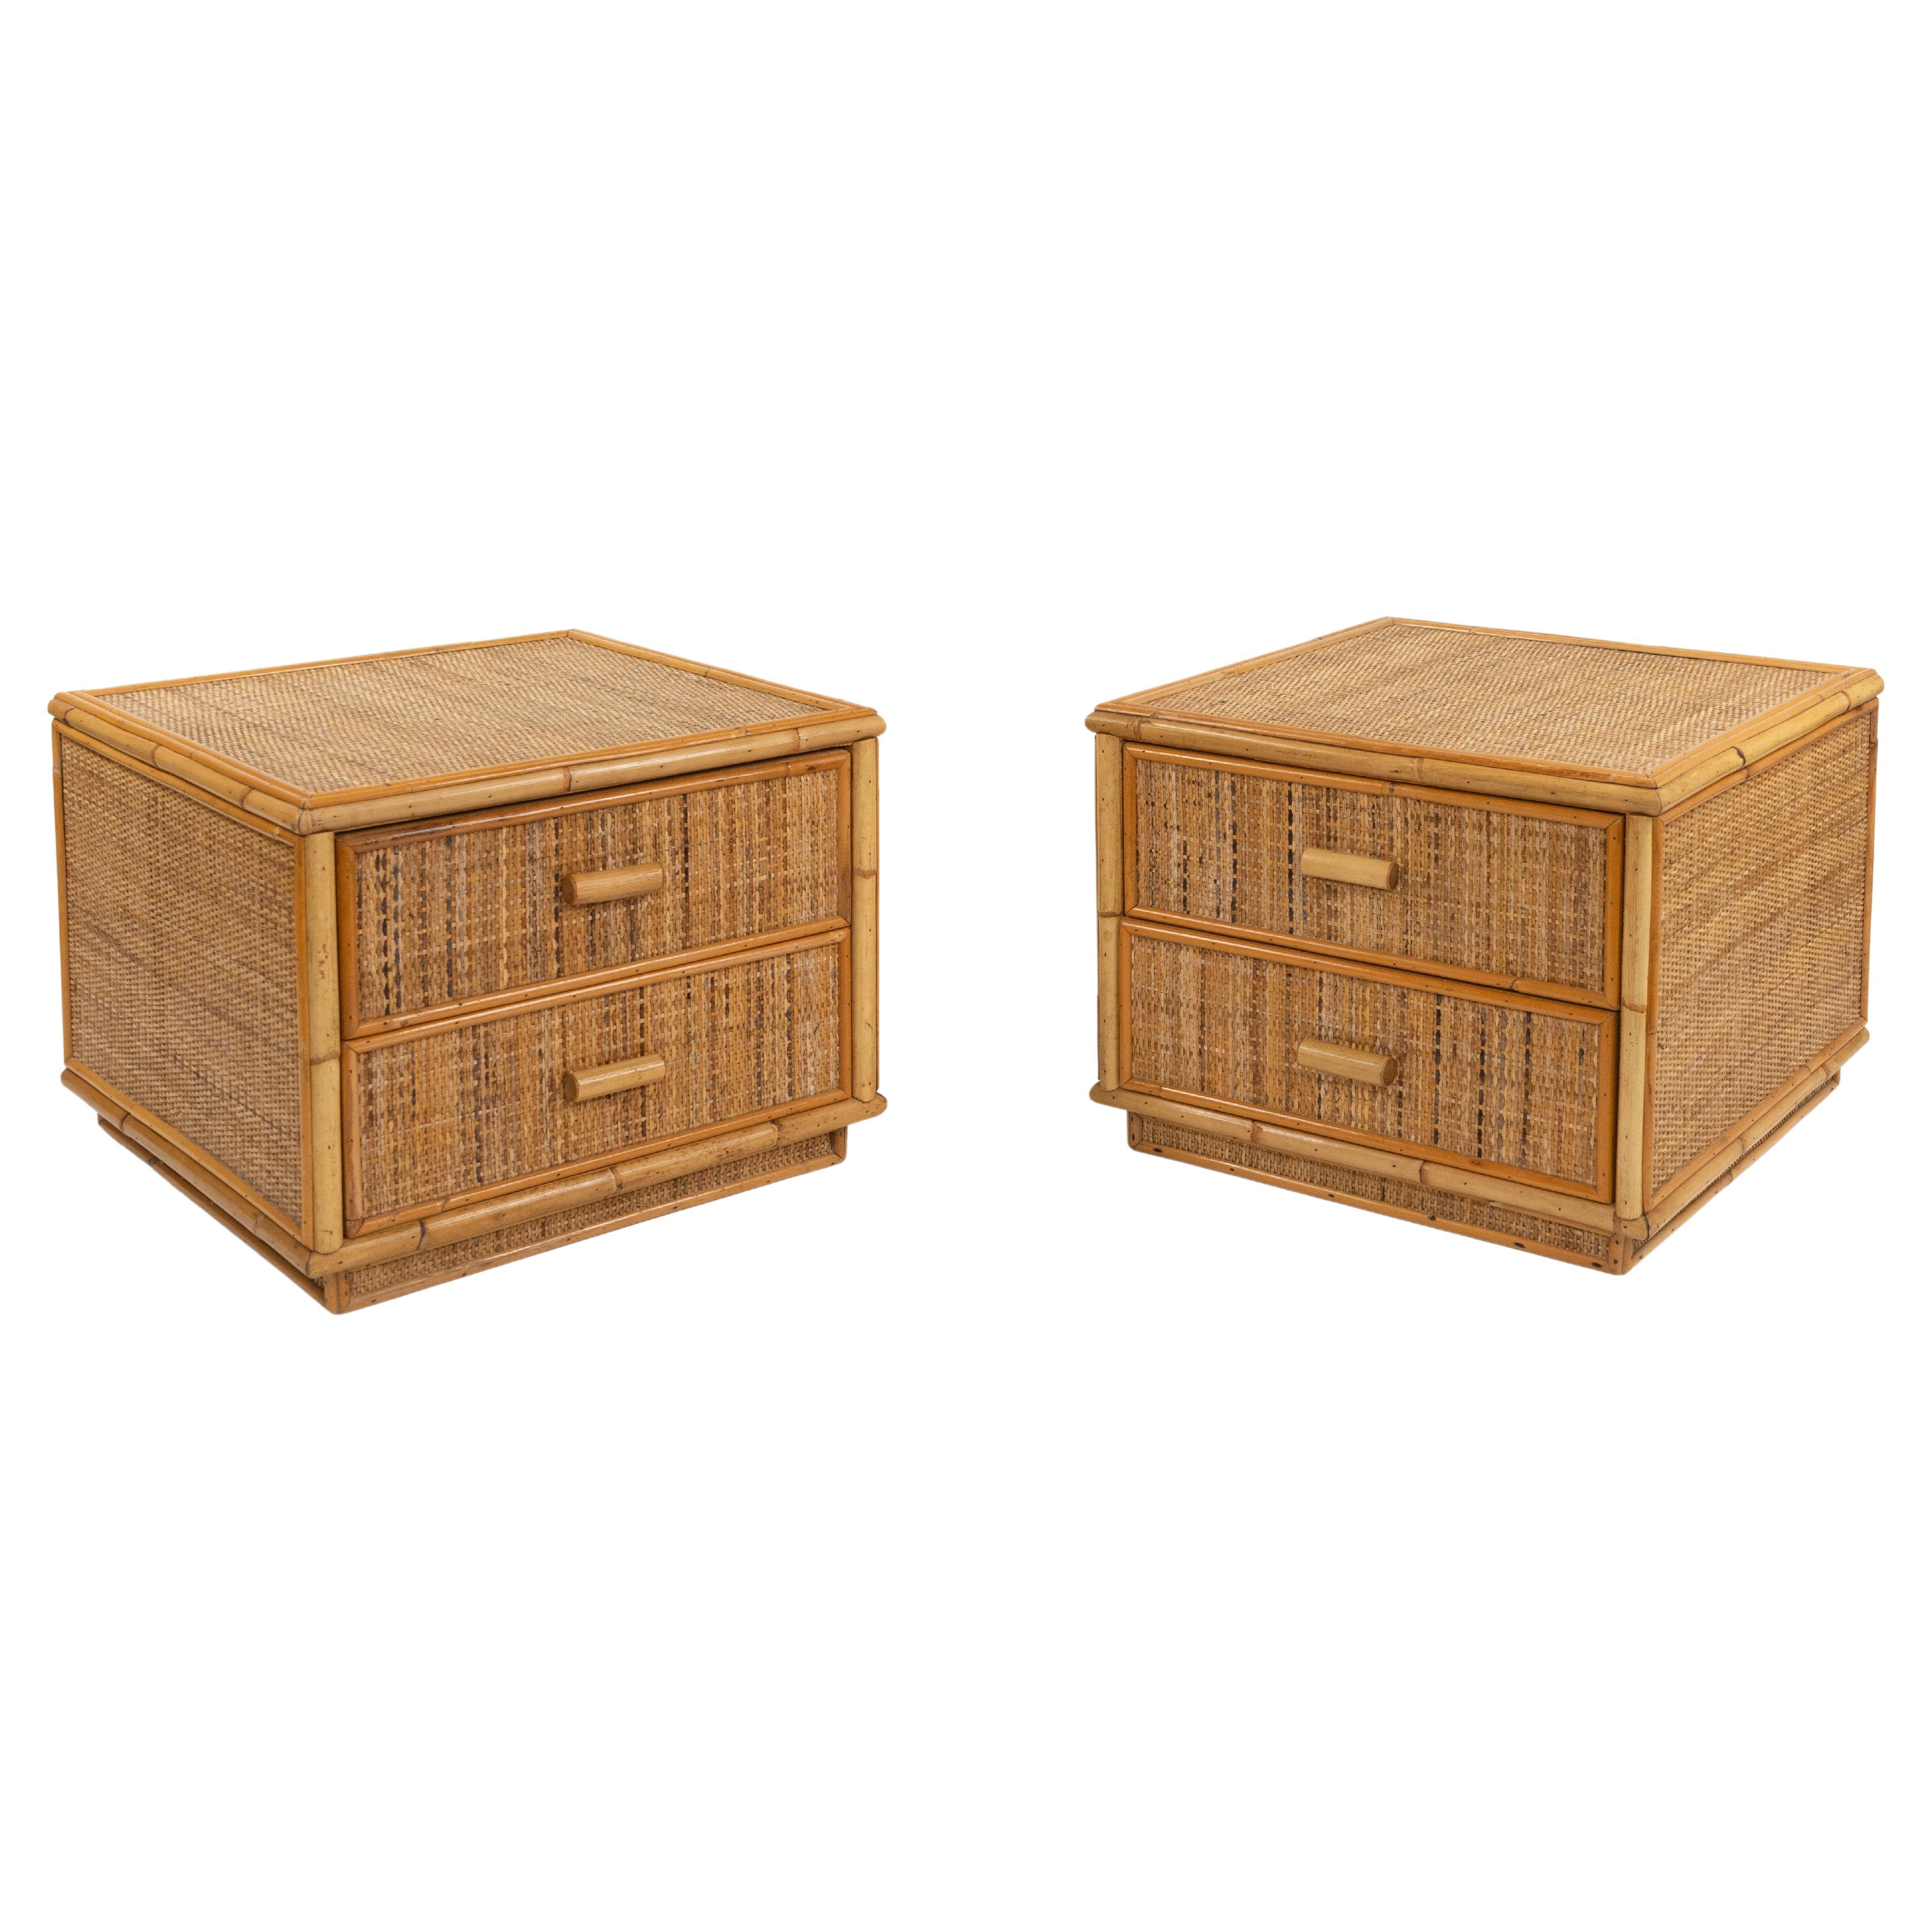 Bamboo and Rattan Pair of Bedside Tables Nightstands Dal Vera Style, Italy 1970s For Sale